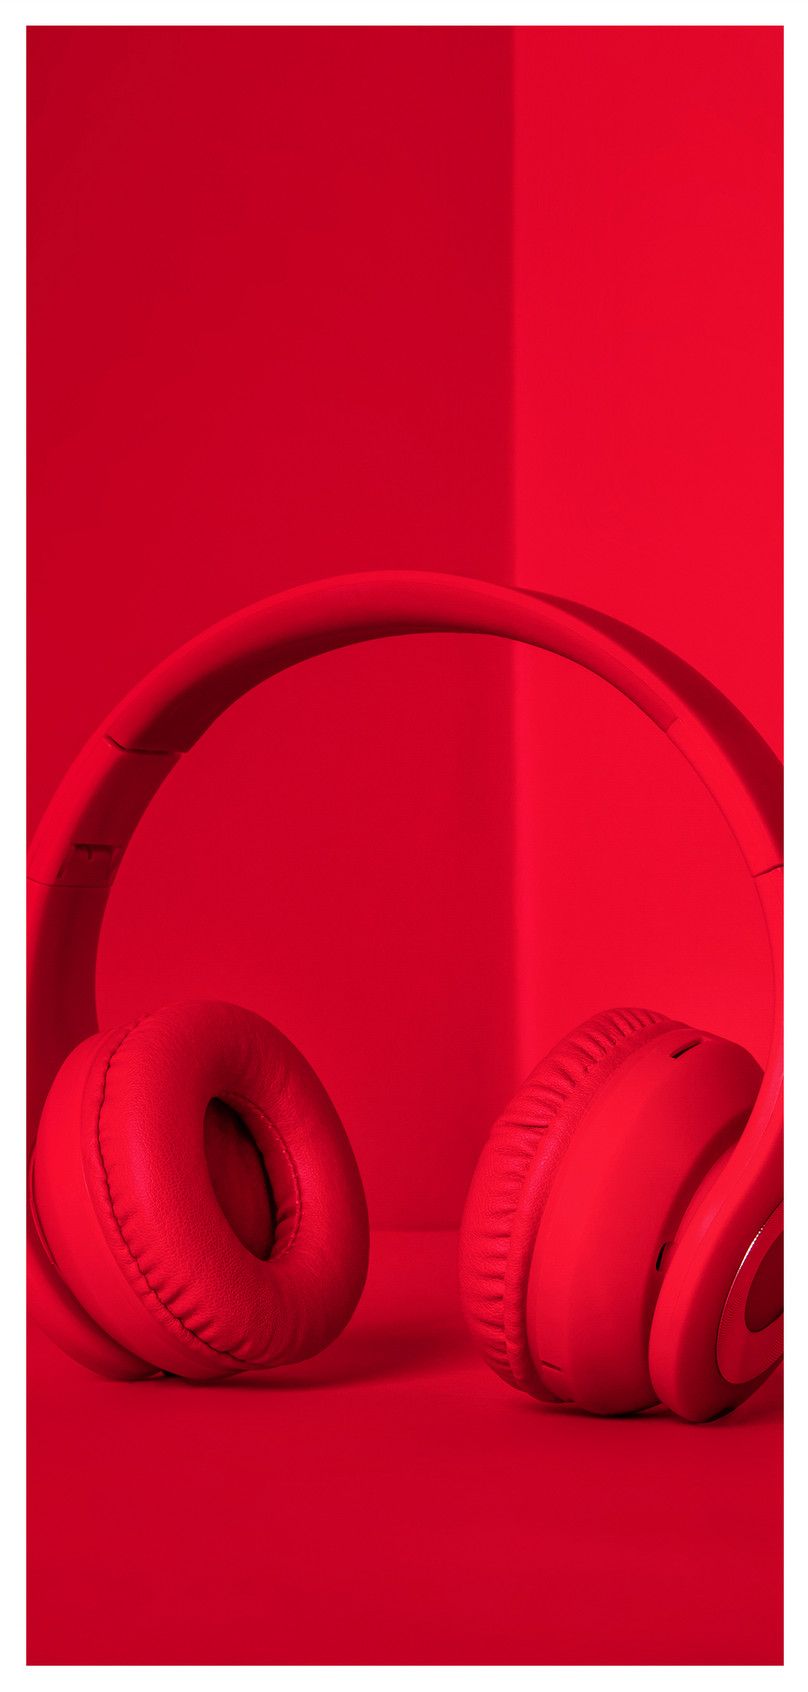 mobile phone wallpaper with red headphones background image free